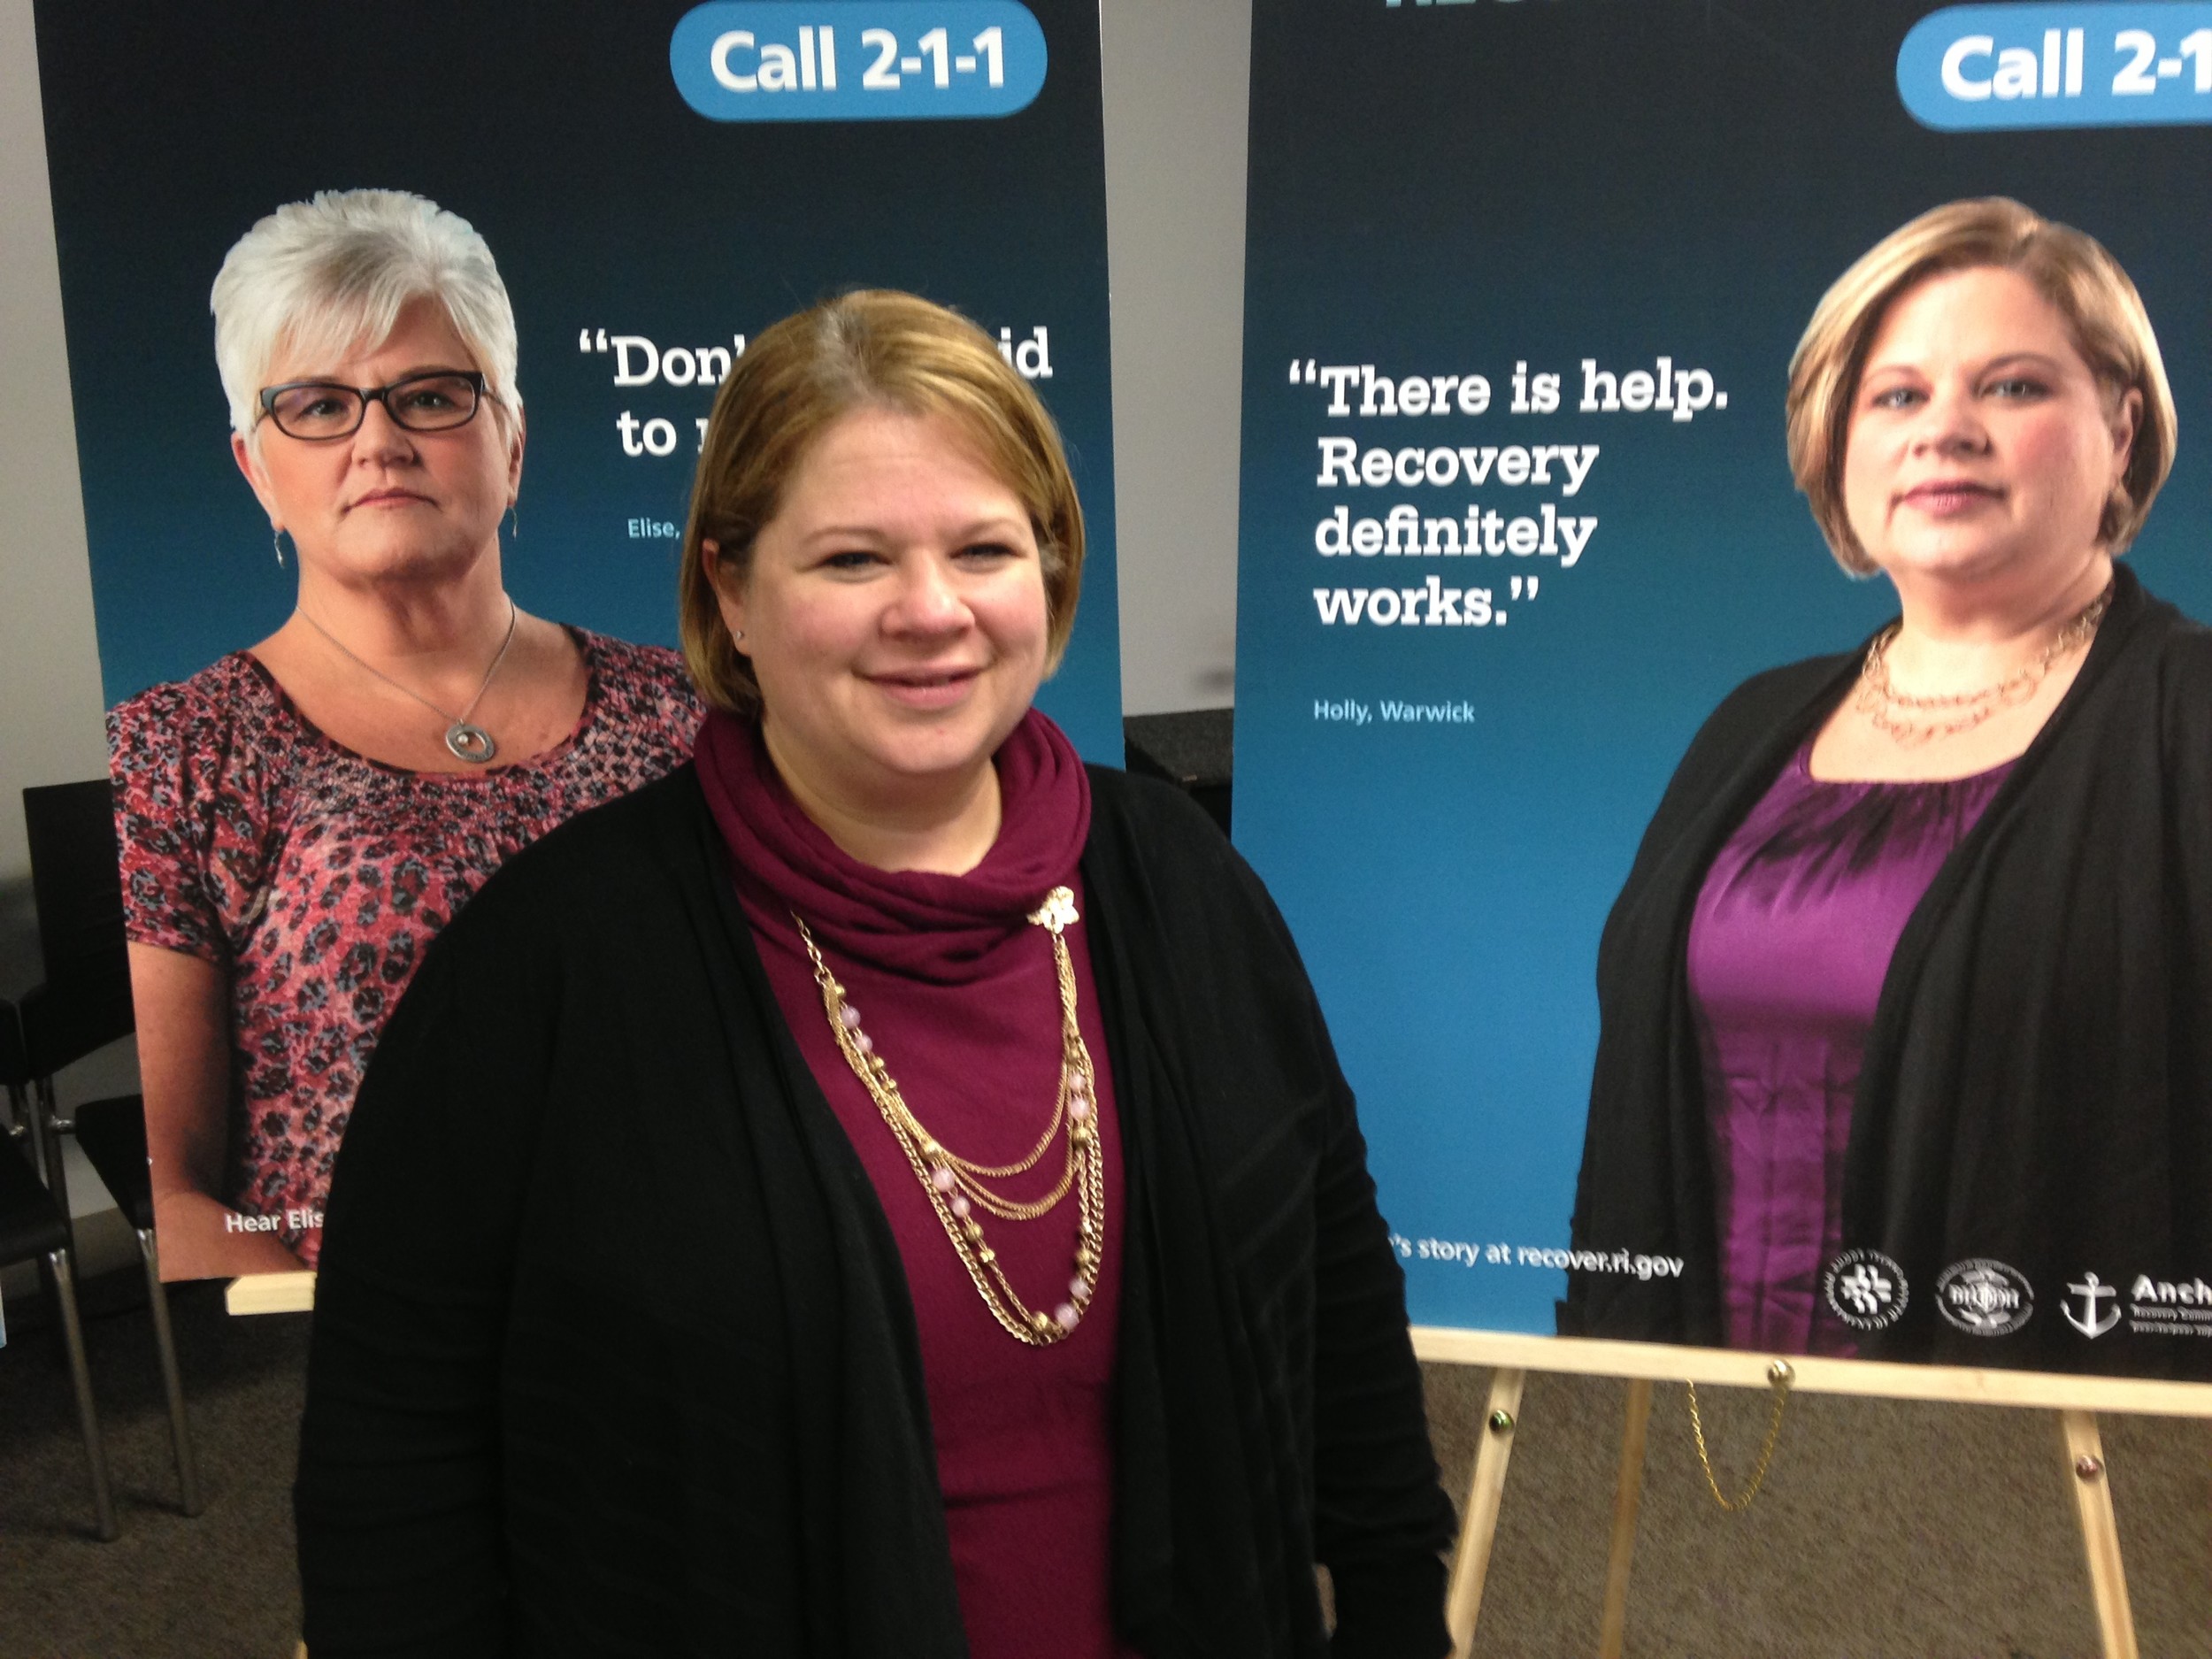 Holly Cekala, executive director of RICares, in front of a poster featuring her story as part of a new media campaign promoting recovery in Rhode Island, following a news conference to launch the campaign.